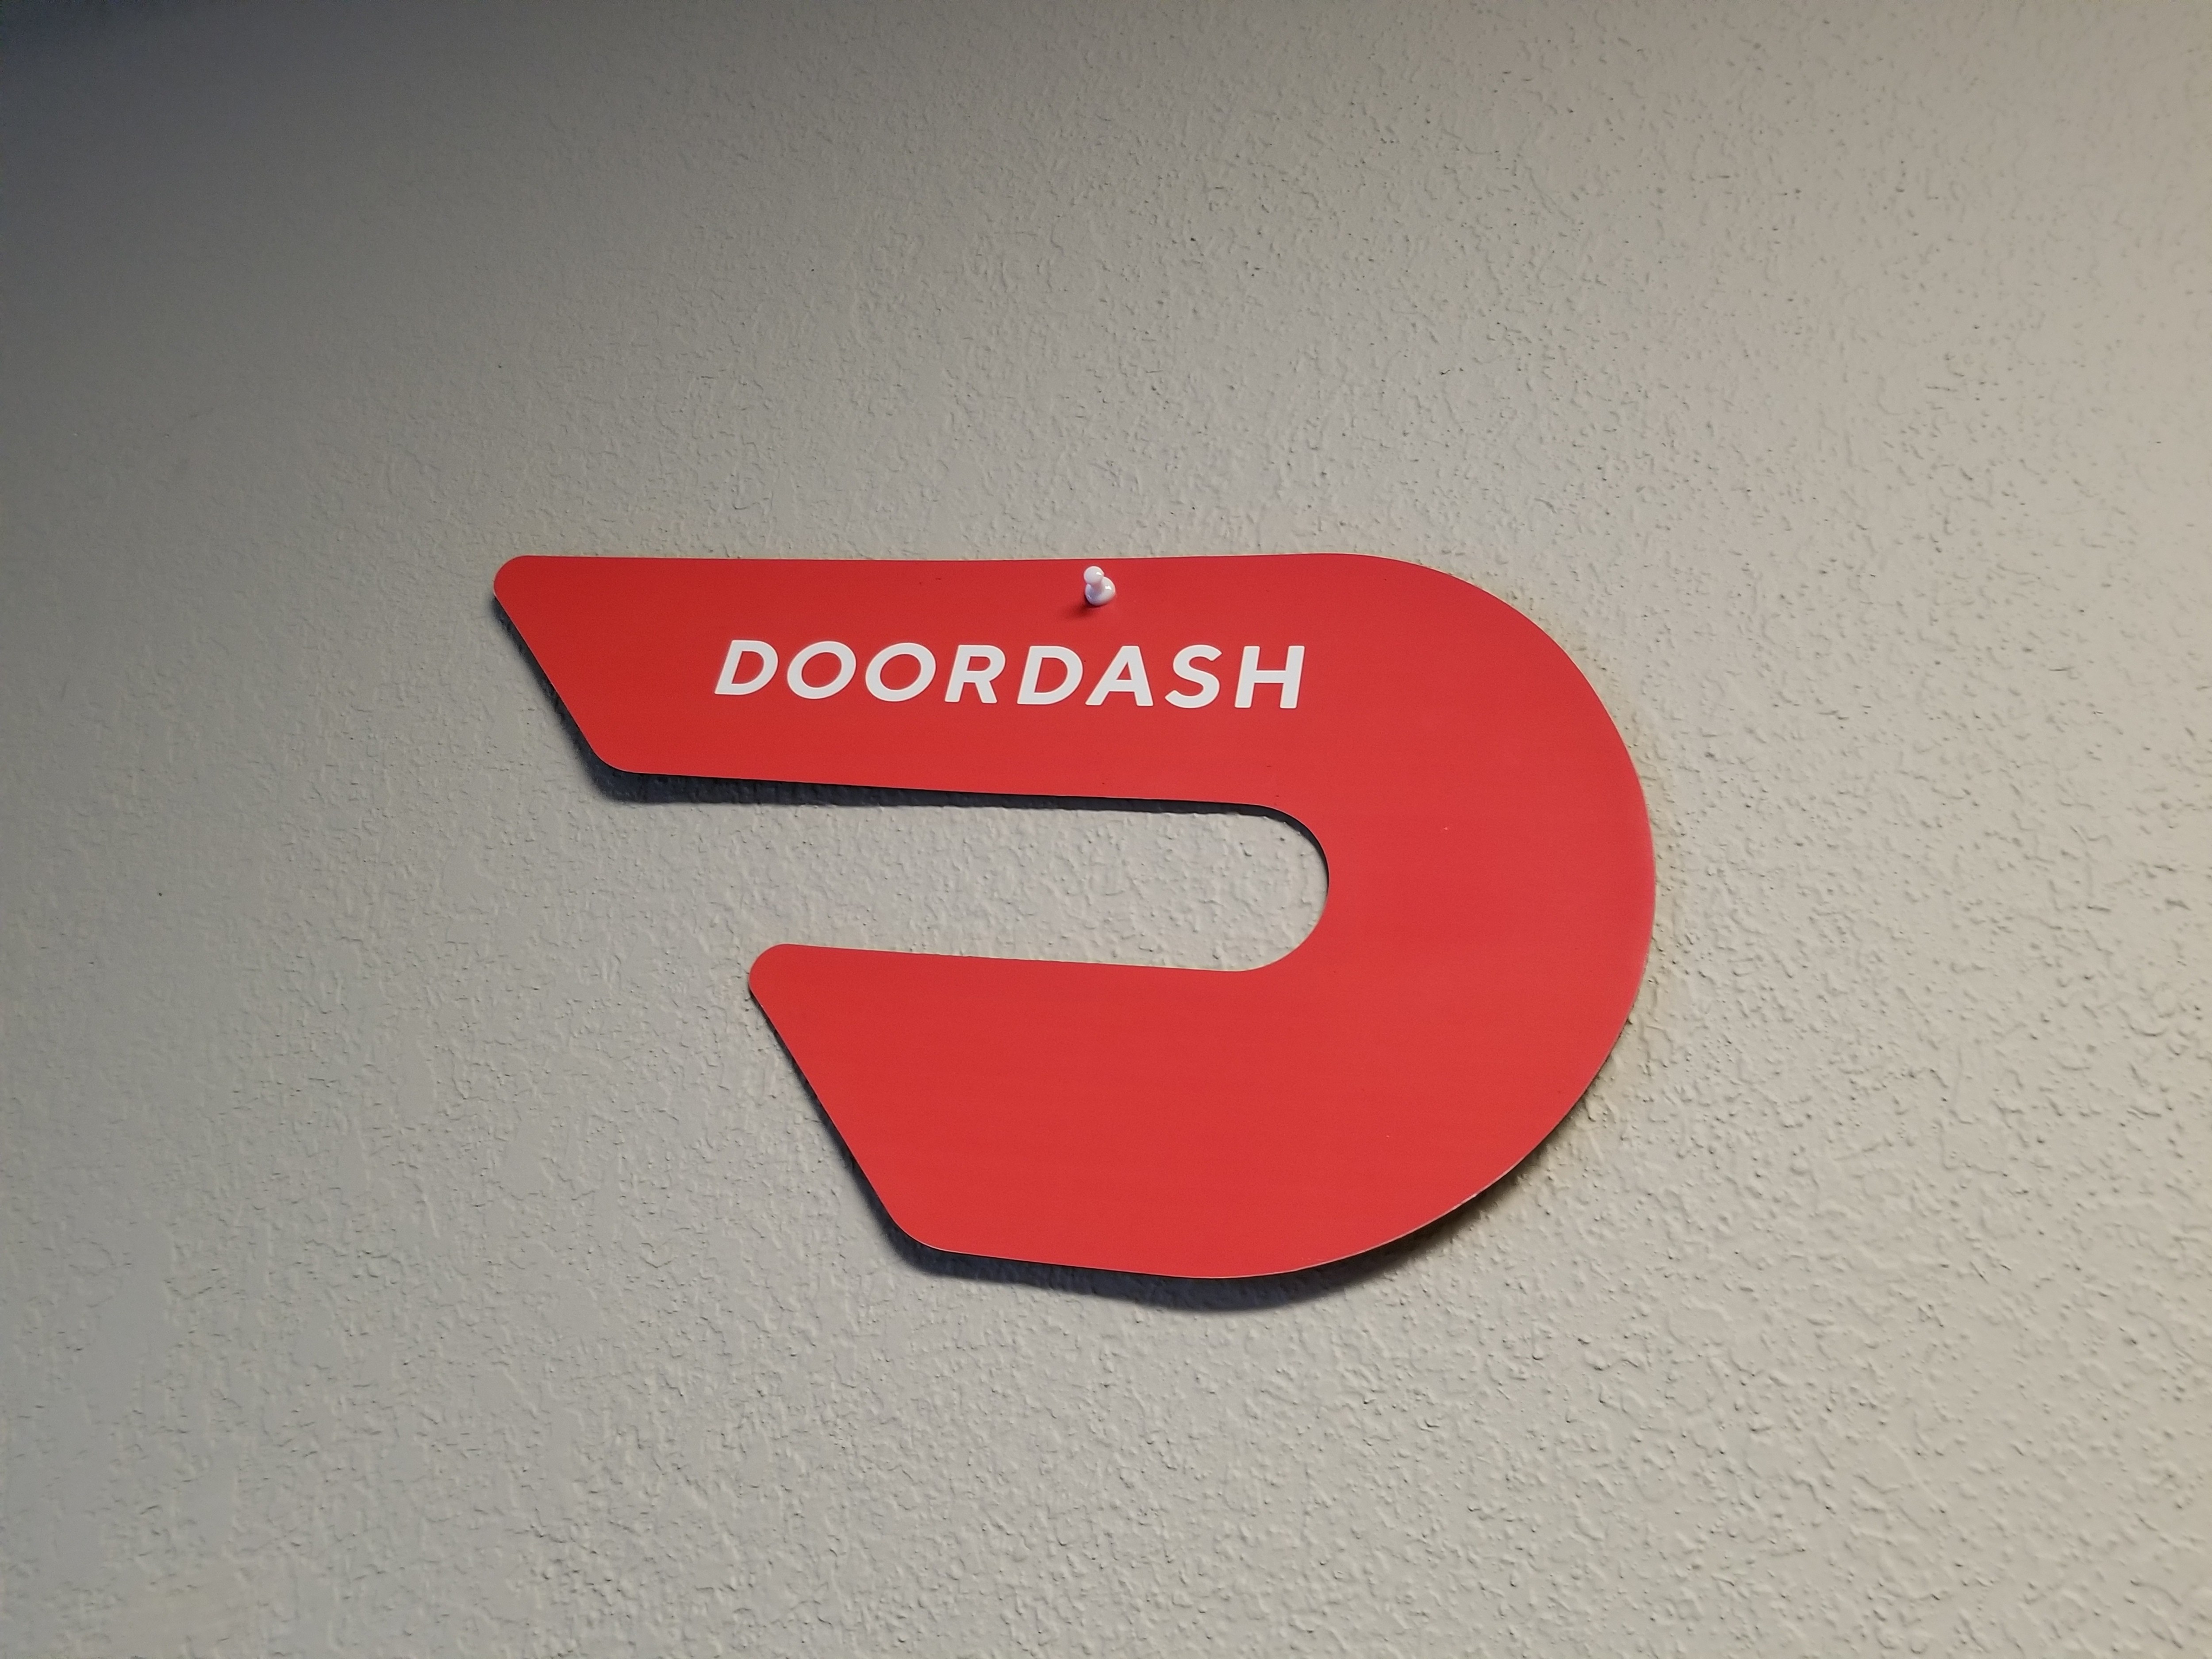 DoorDash Driver's Stolen Car Reveals Truth About Childcare and Gig Work